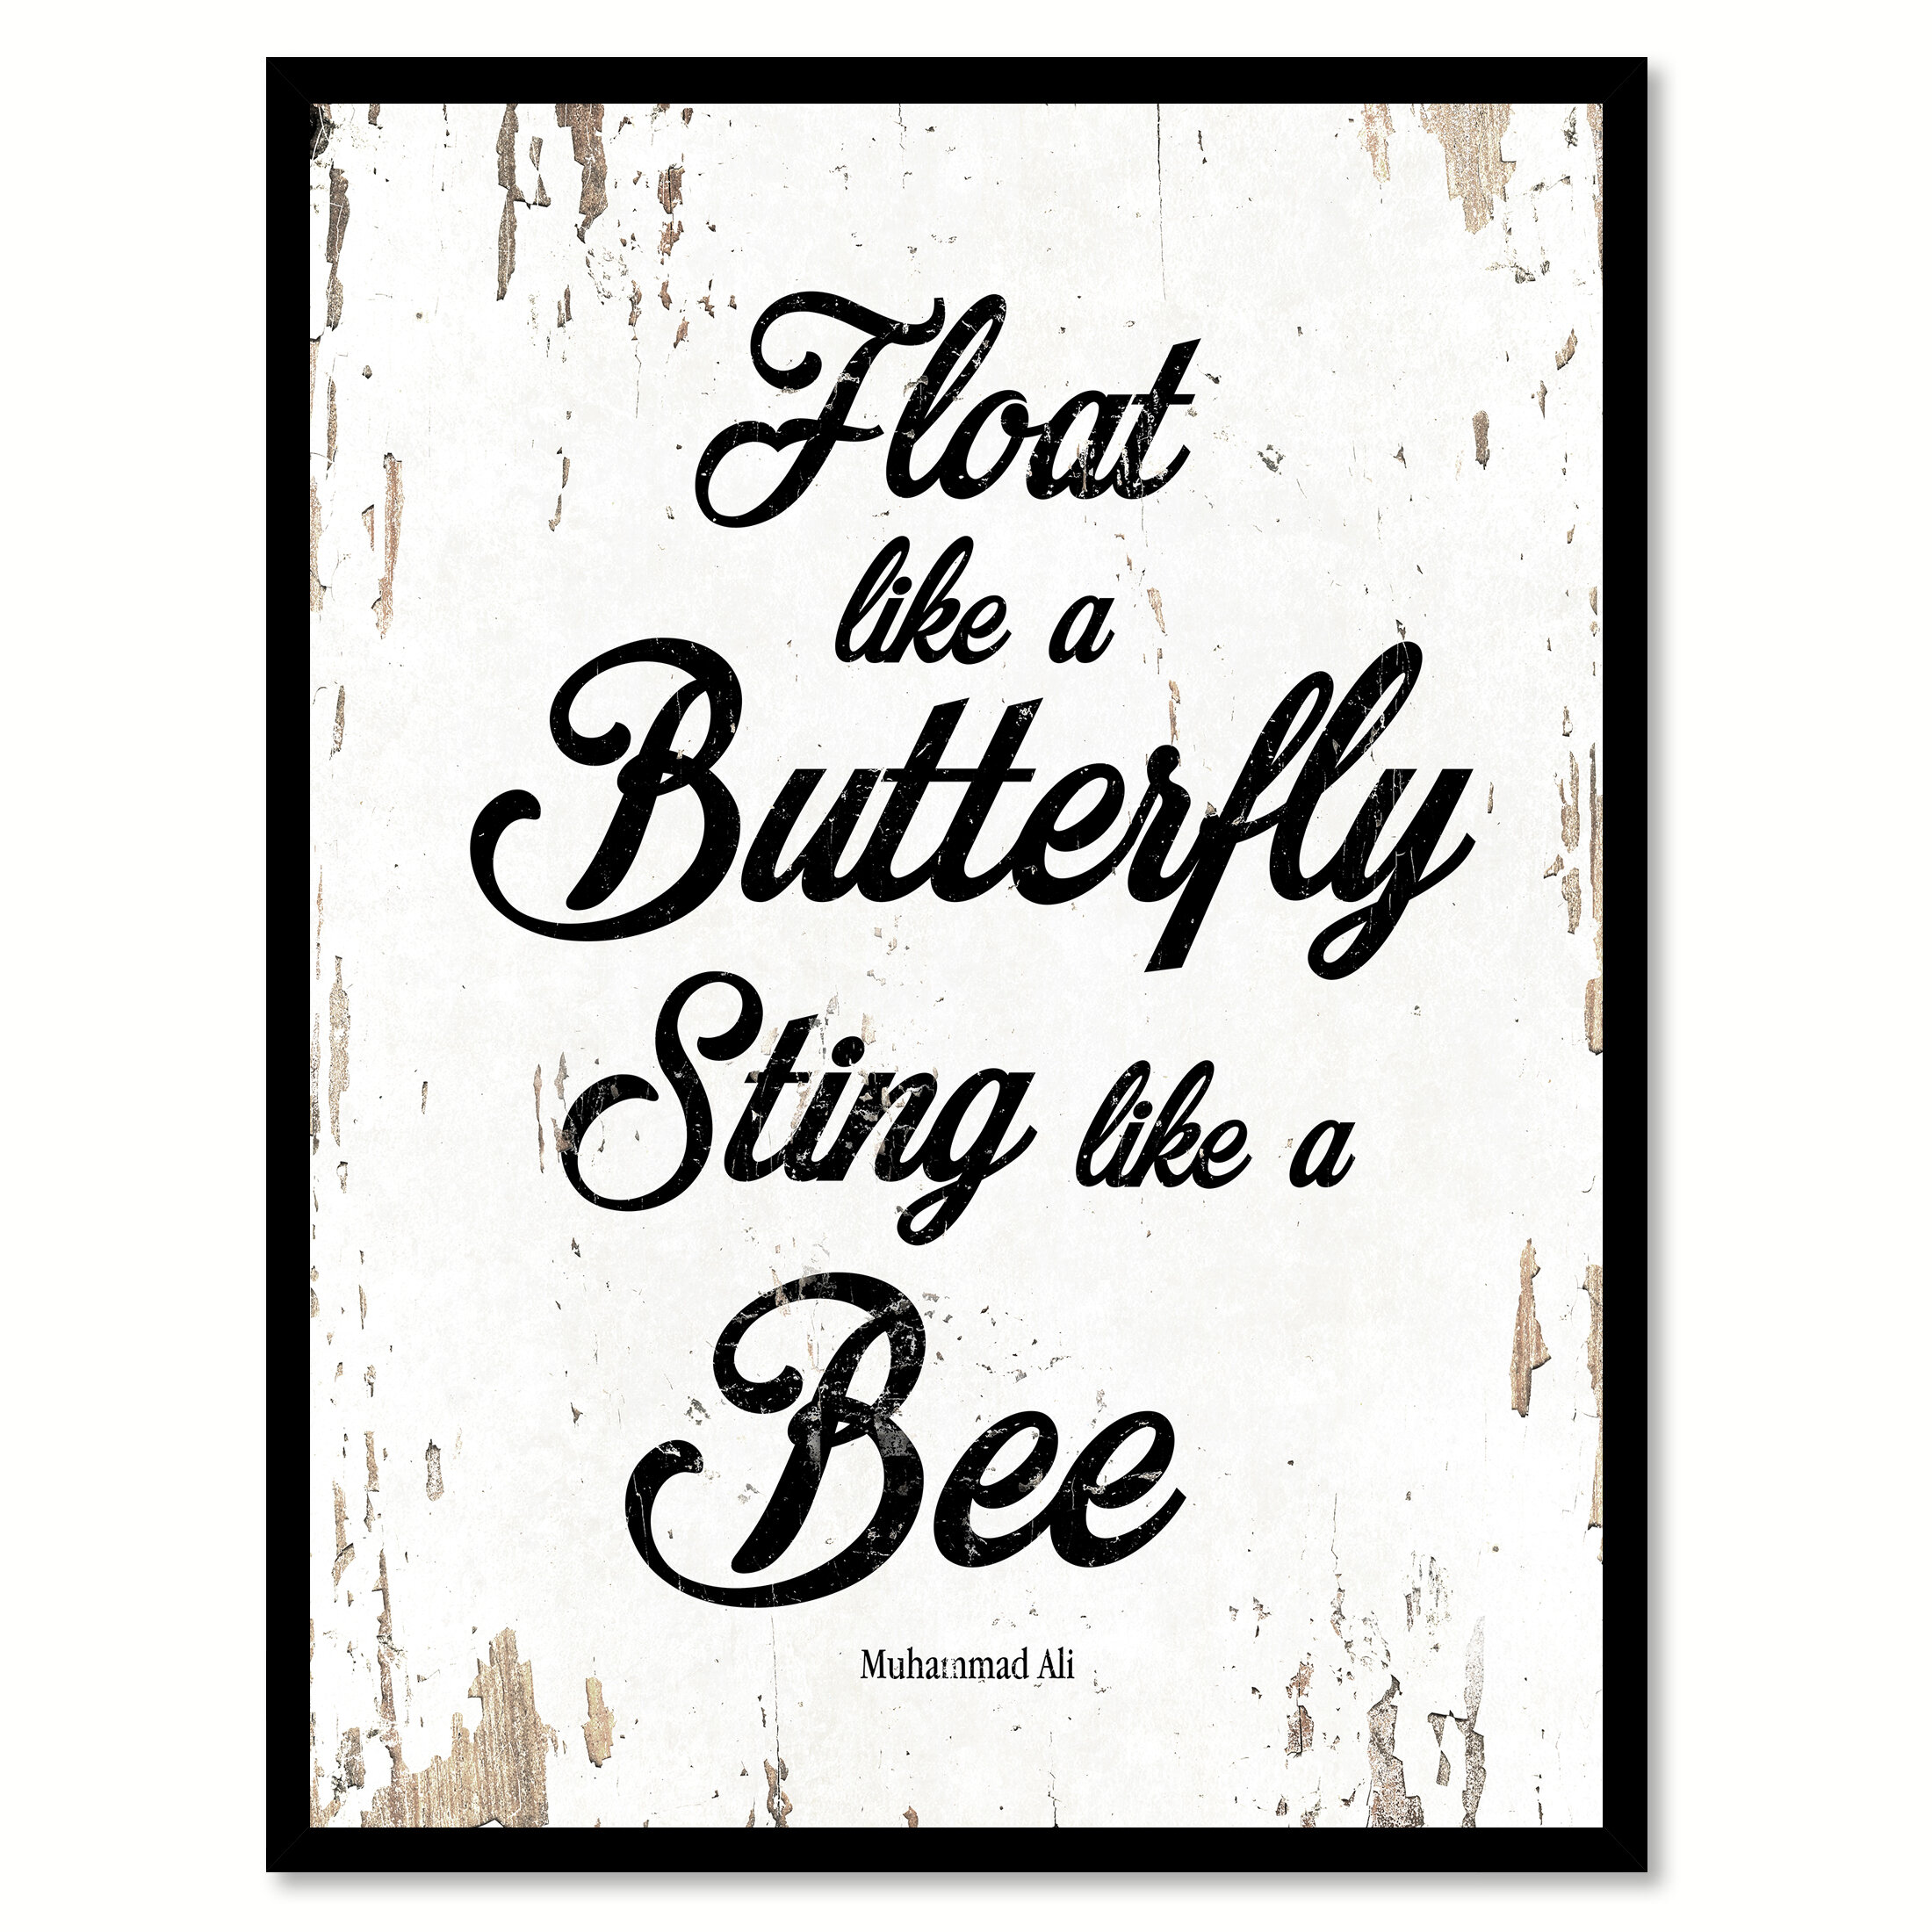 Wrought Studio Float Like A Butterfly Sting Like A Bee Picture Frame Textual Art Print On Canvas Wayfair